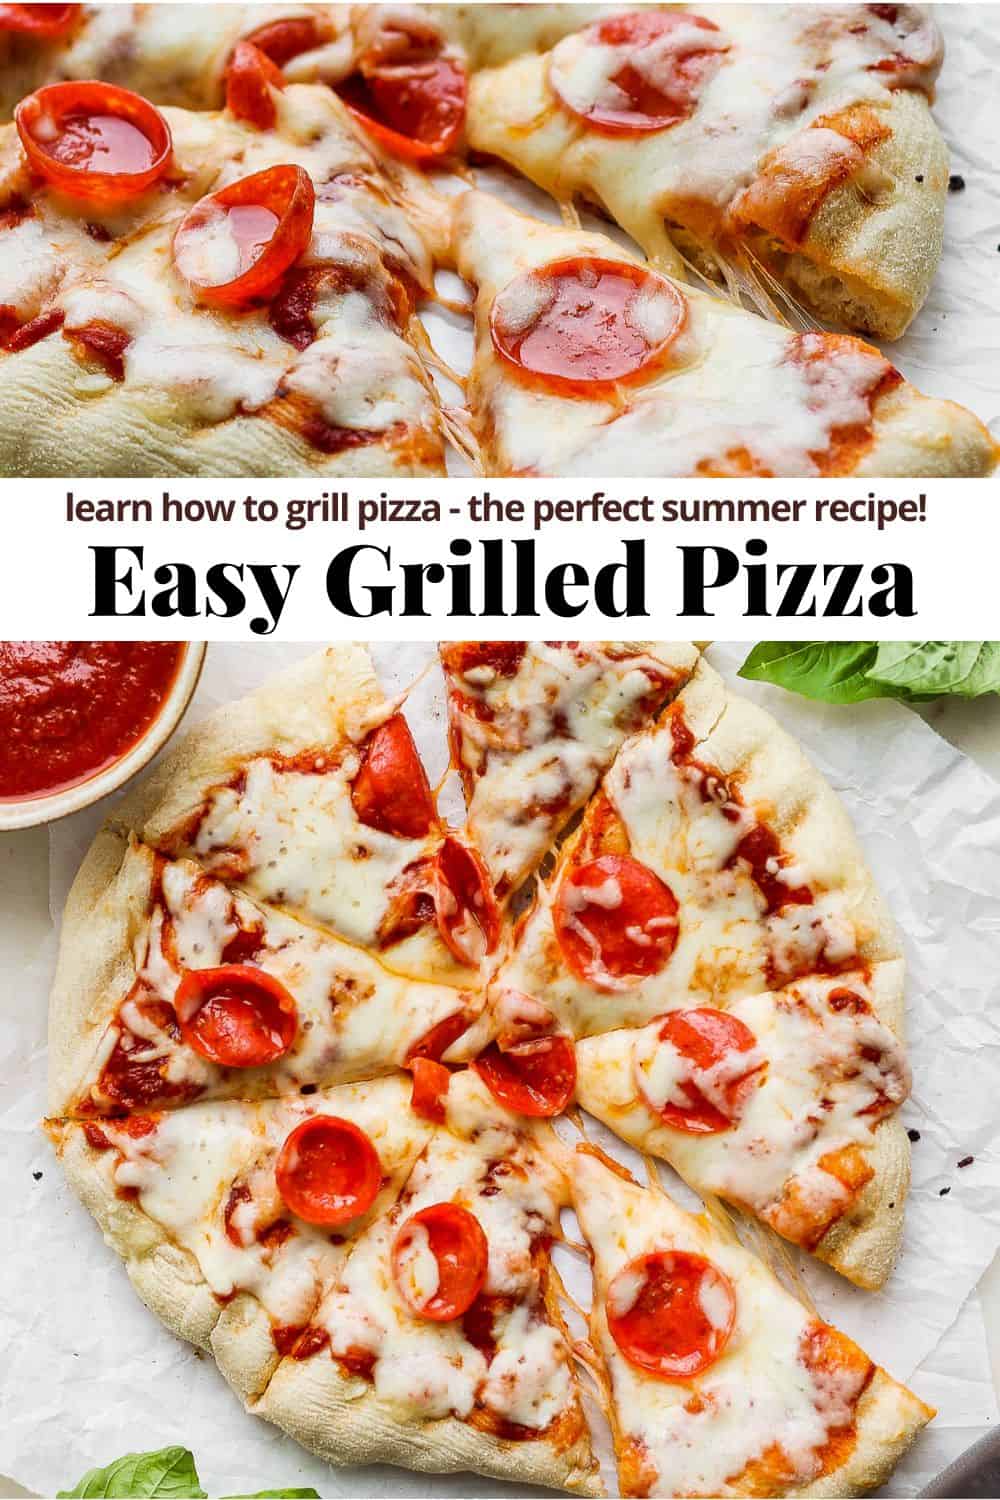 Pinterest image for how to grill pizza.